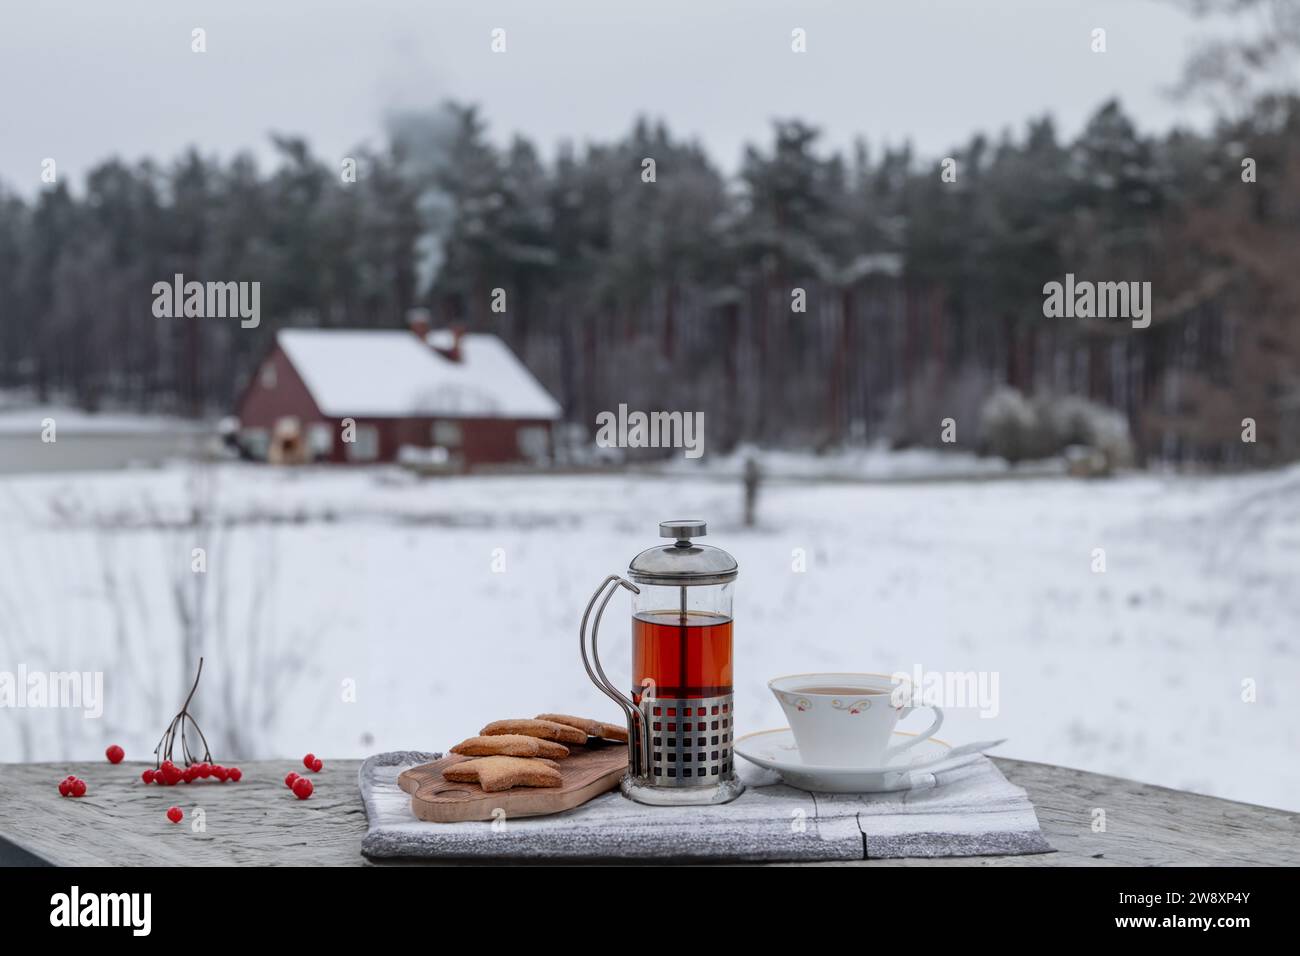 Tea in a teapot on a snowy forest meadow with a house. Stock Photo